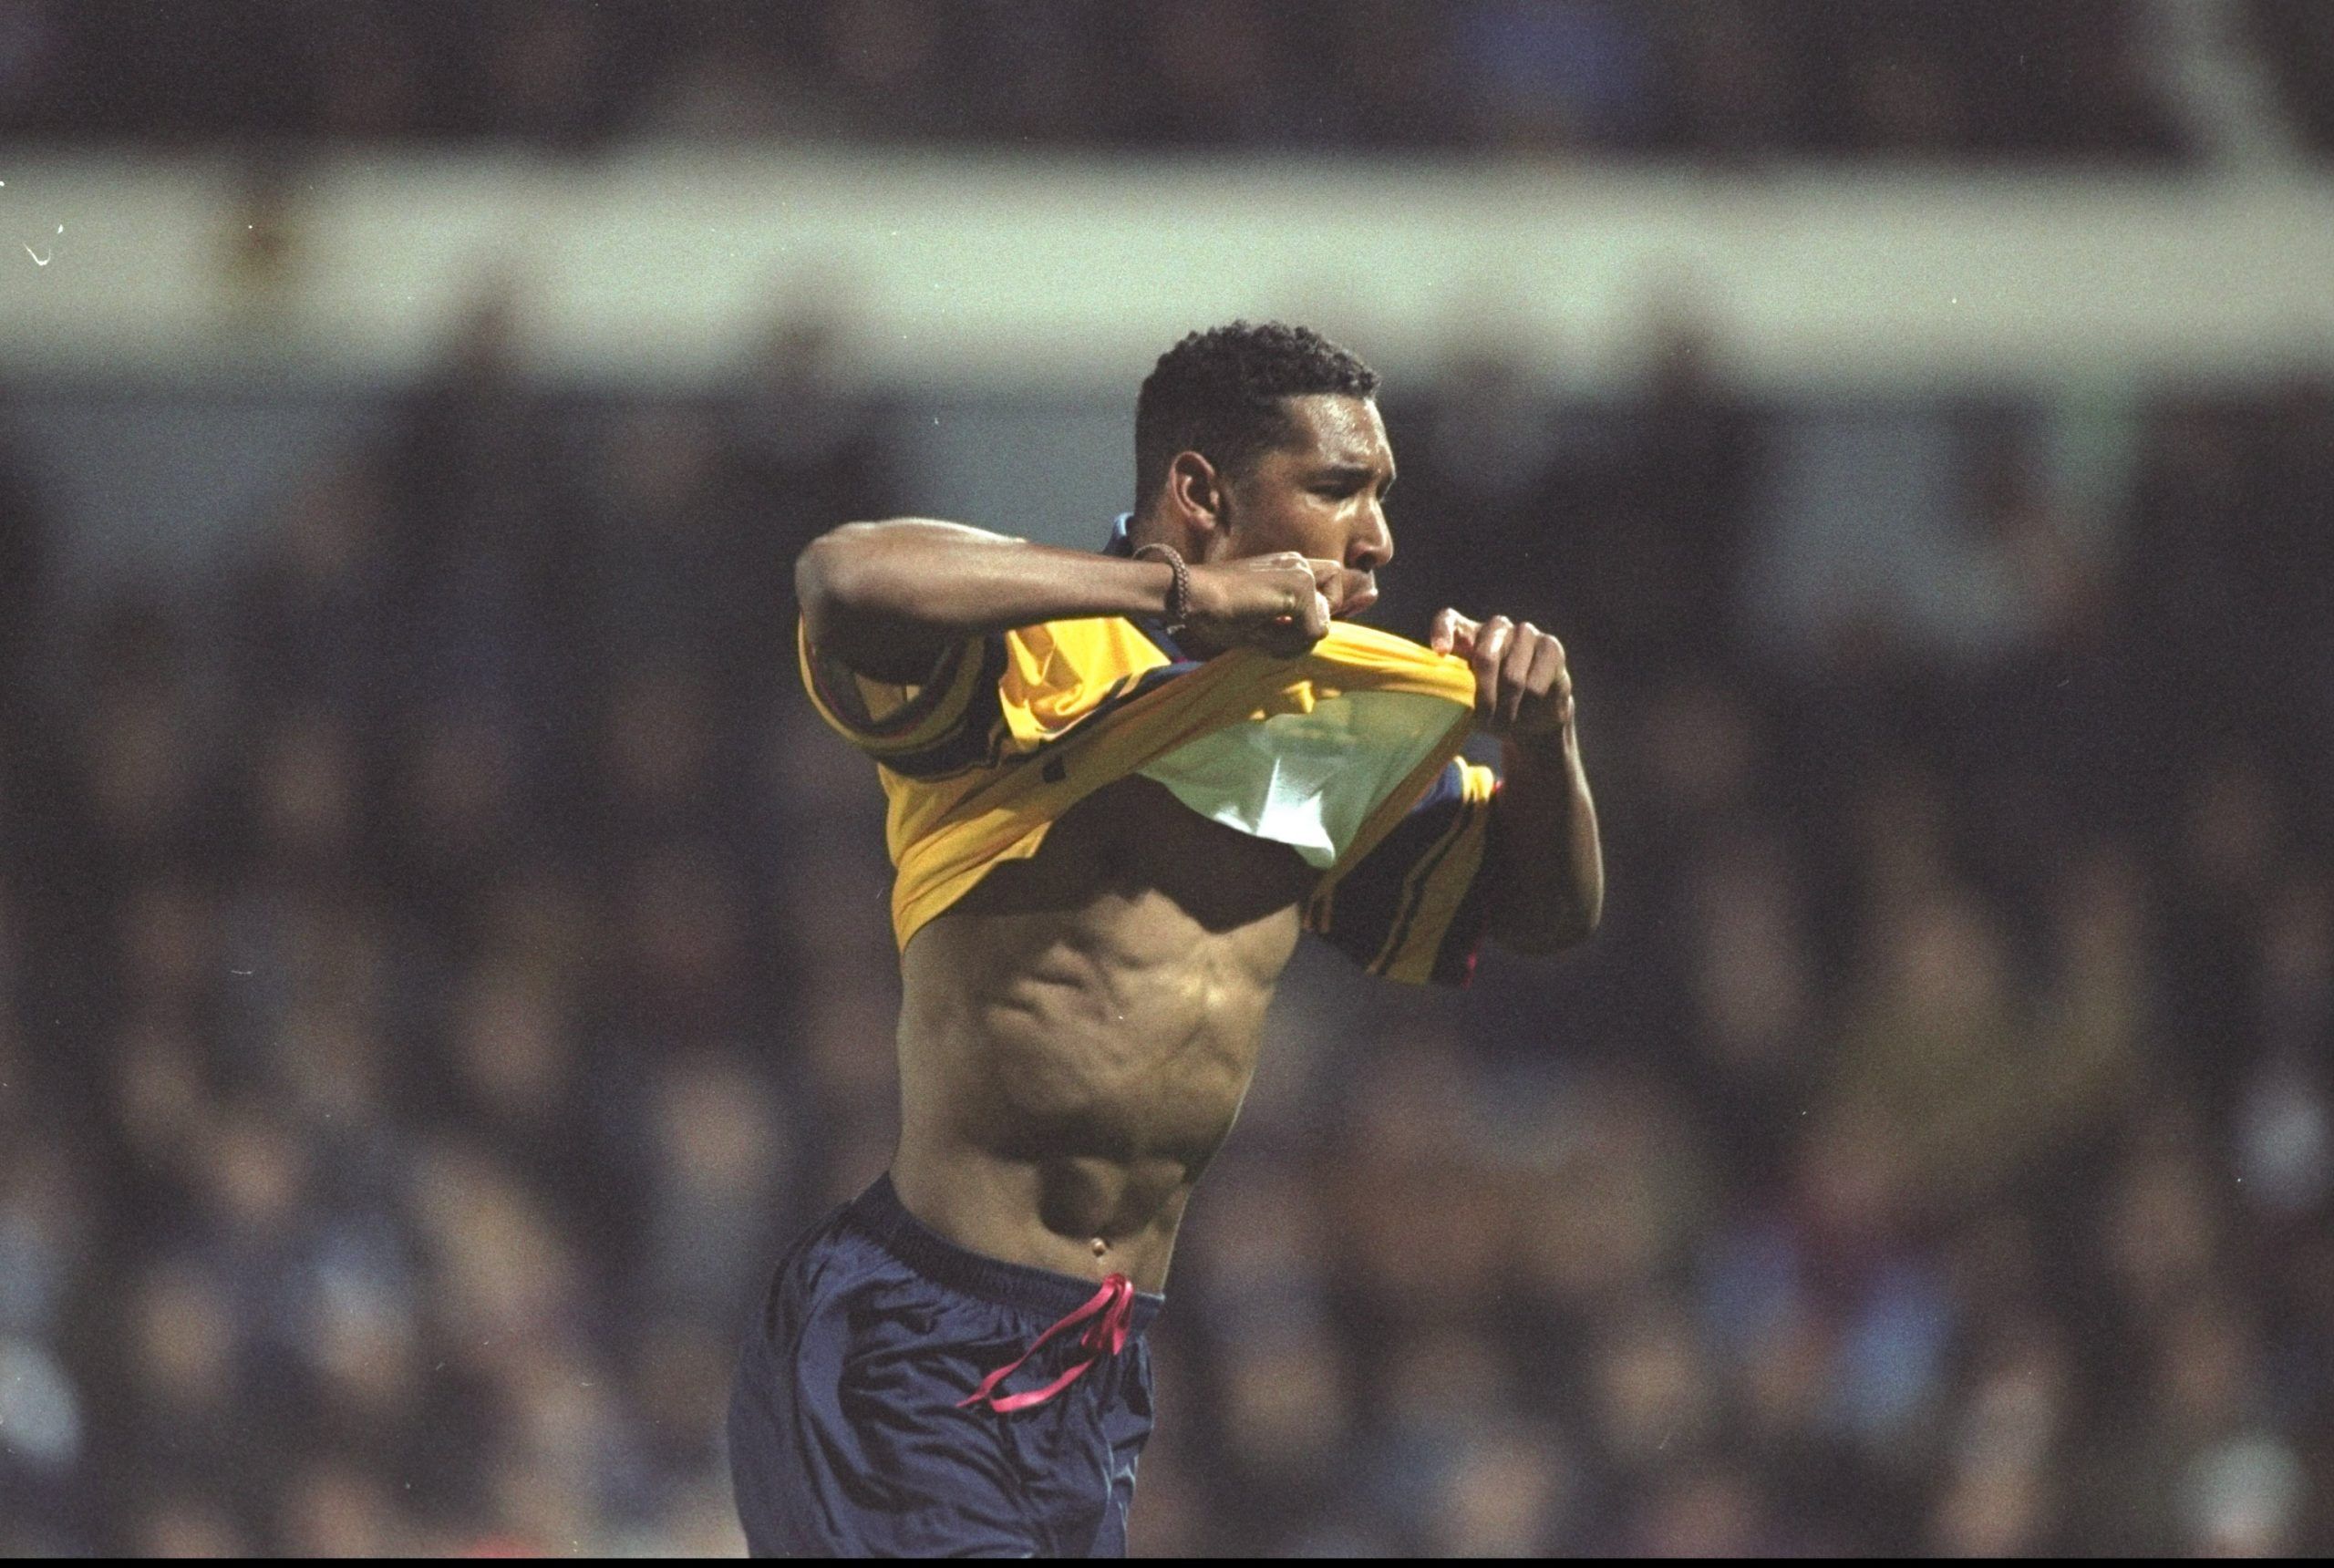 17 Mar 1998: Nicolas Anelka of Arsenal celebrates during the FA Cup quarter-final replay against West Ham United at Upton Park in London. Arsenal won the match 4-3 on penalties. Mandatory Credit: Allsport UK /Allsport